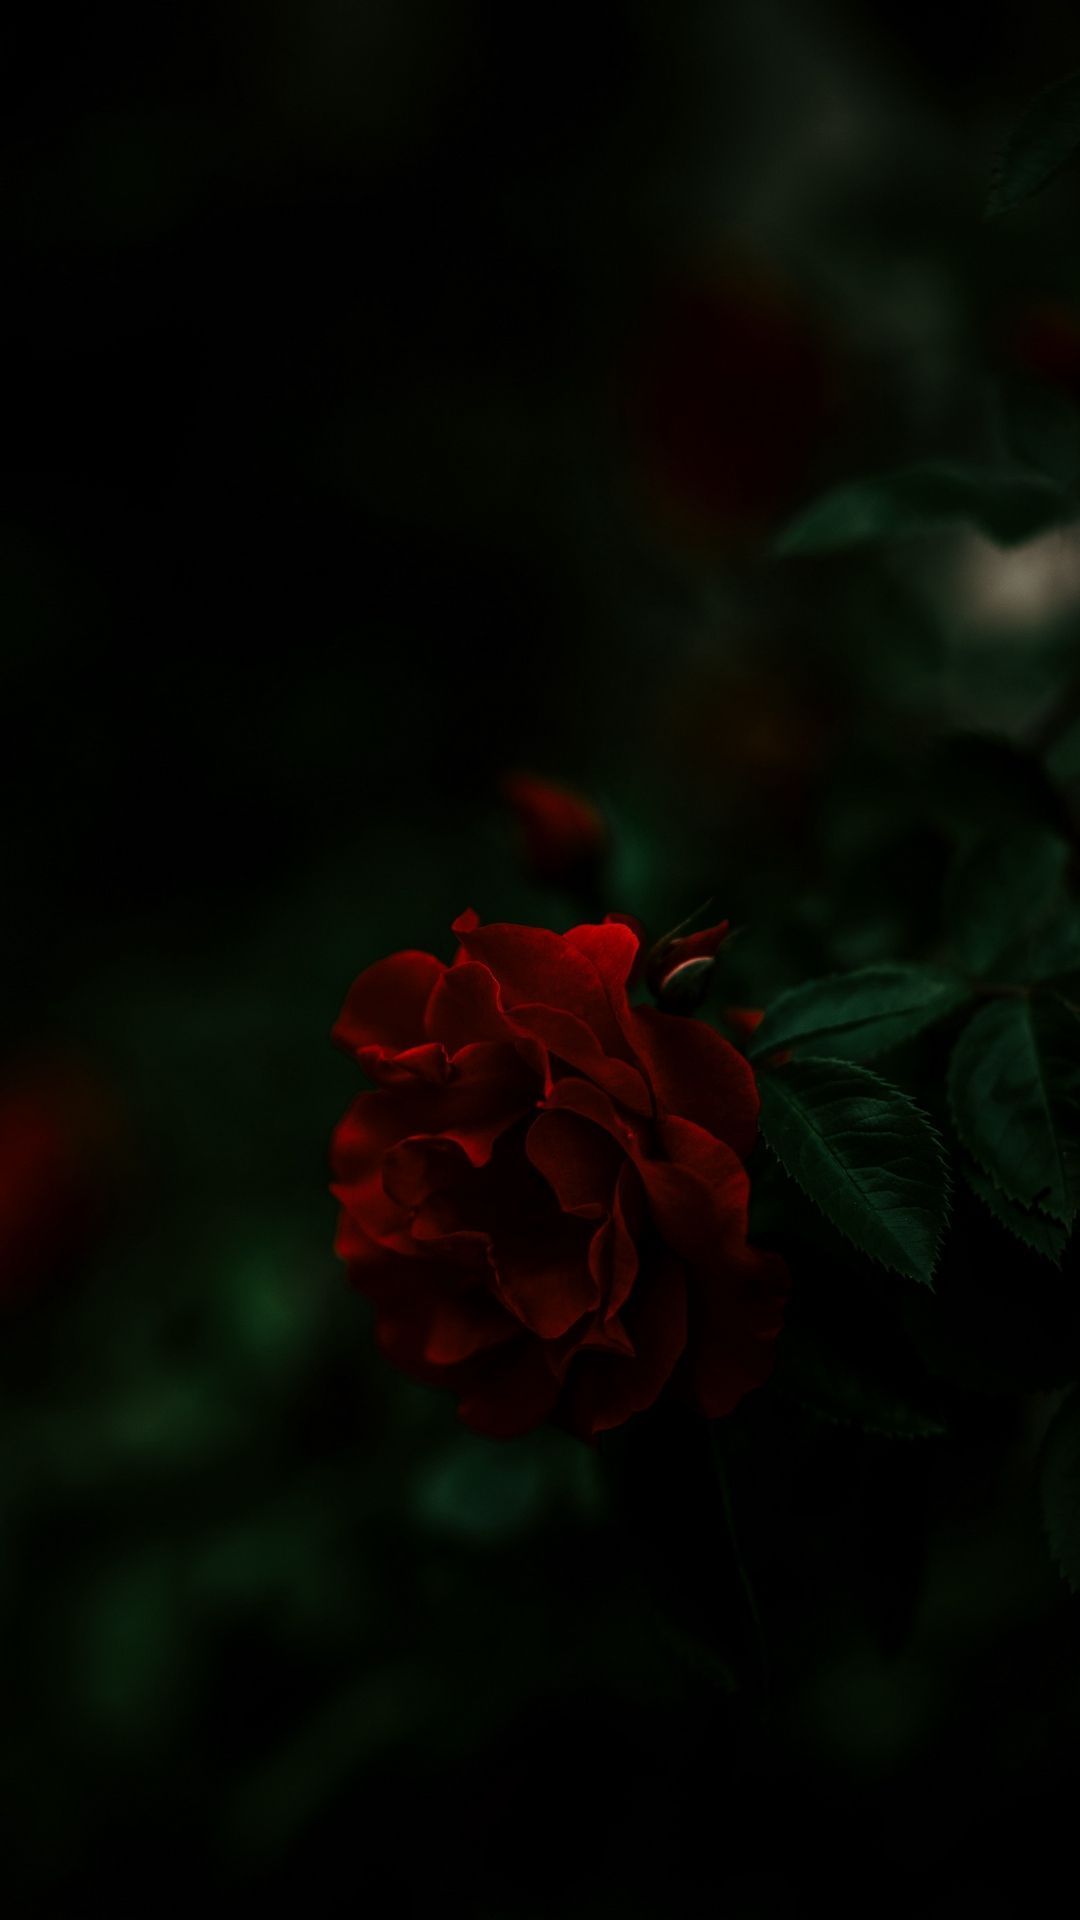 Black and Red Flower Wallpaper .wallpaperaccess.com